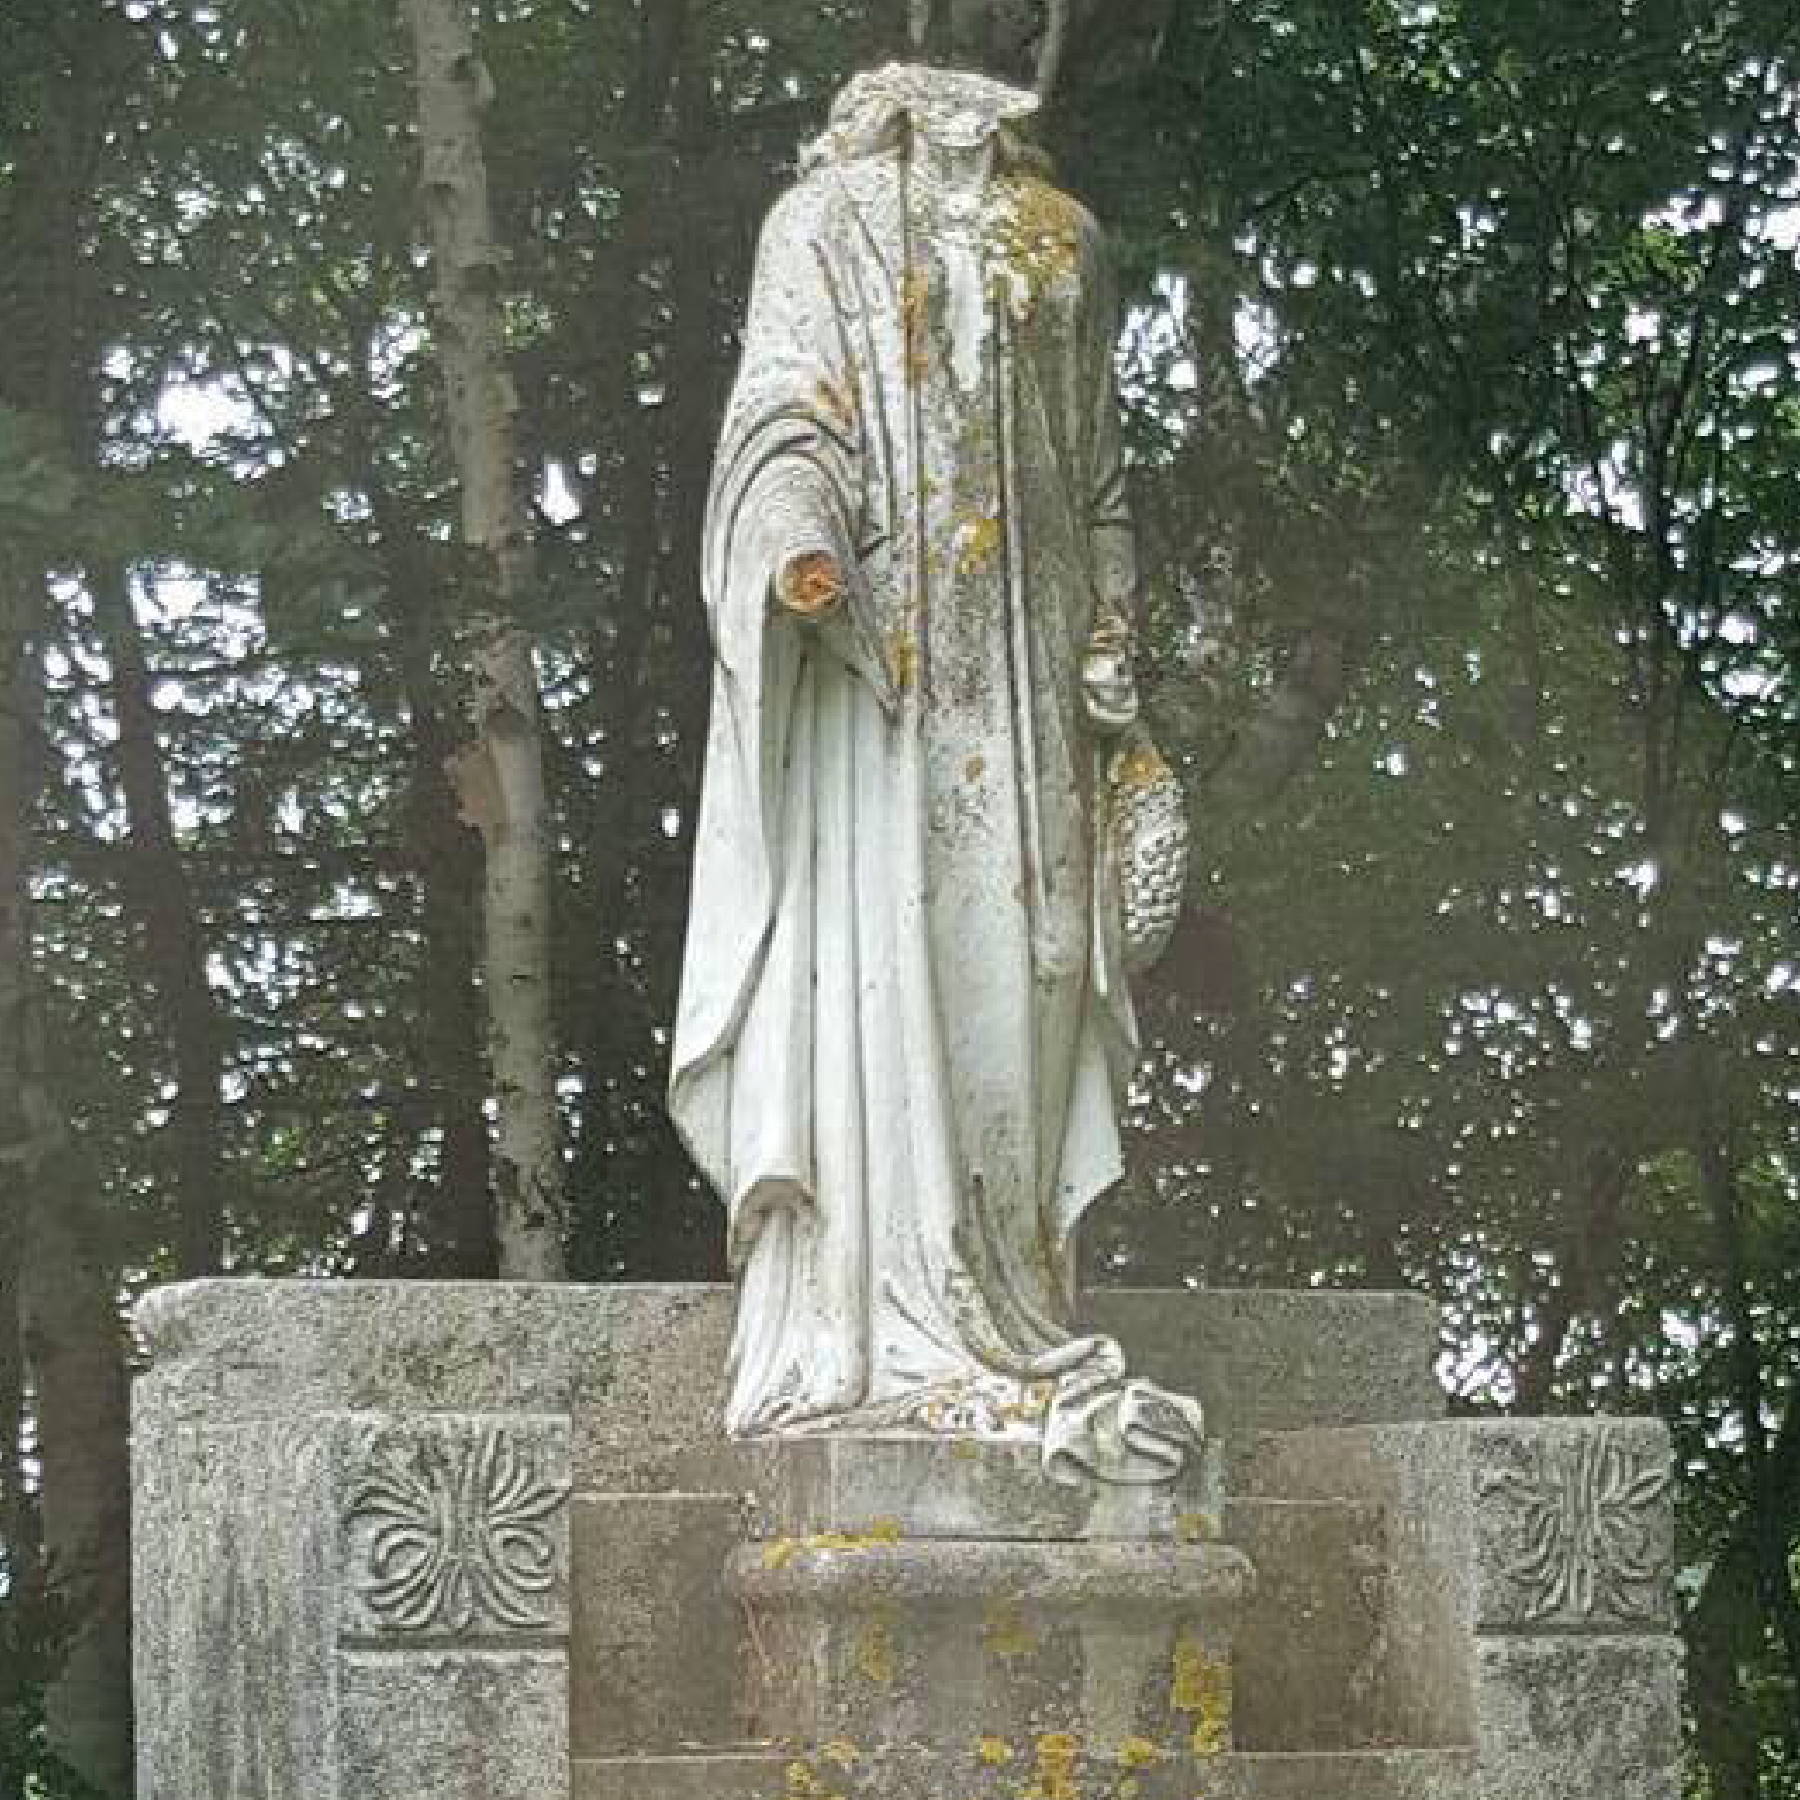 a statue of a person in a cemetery